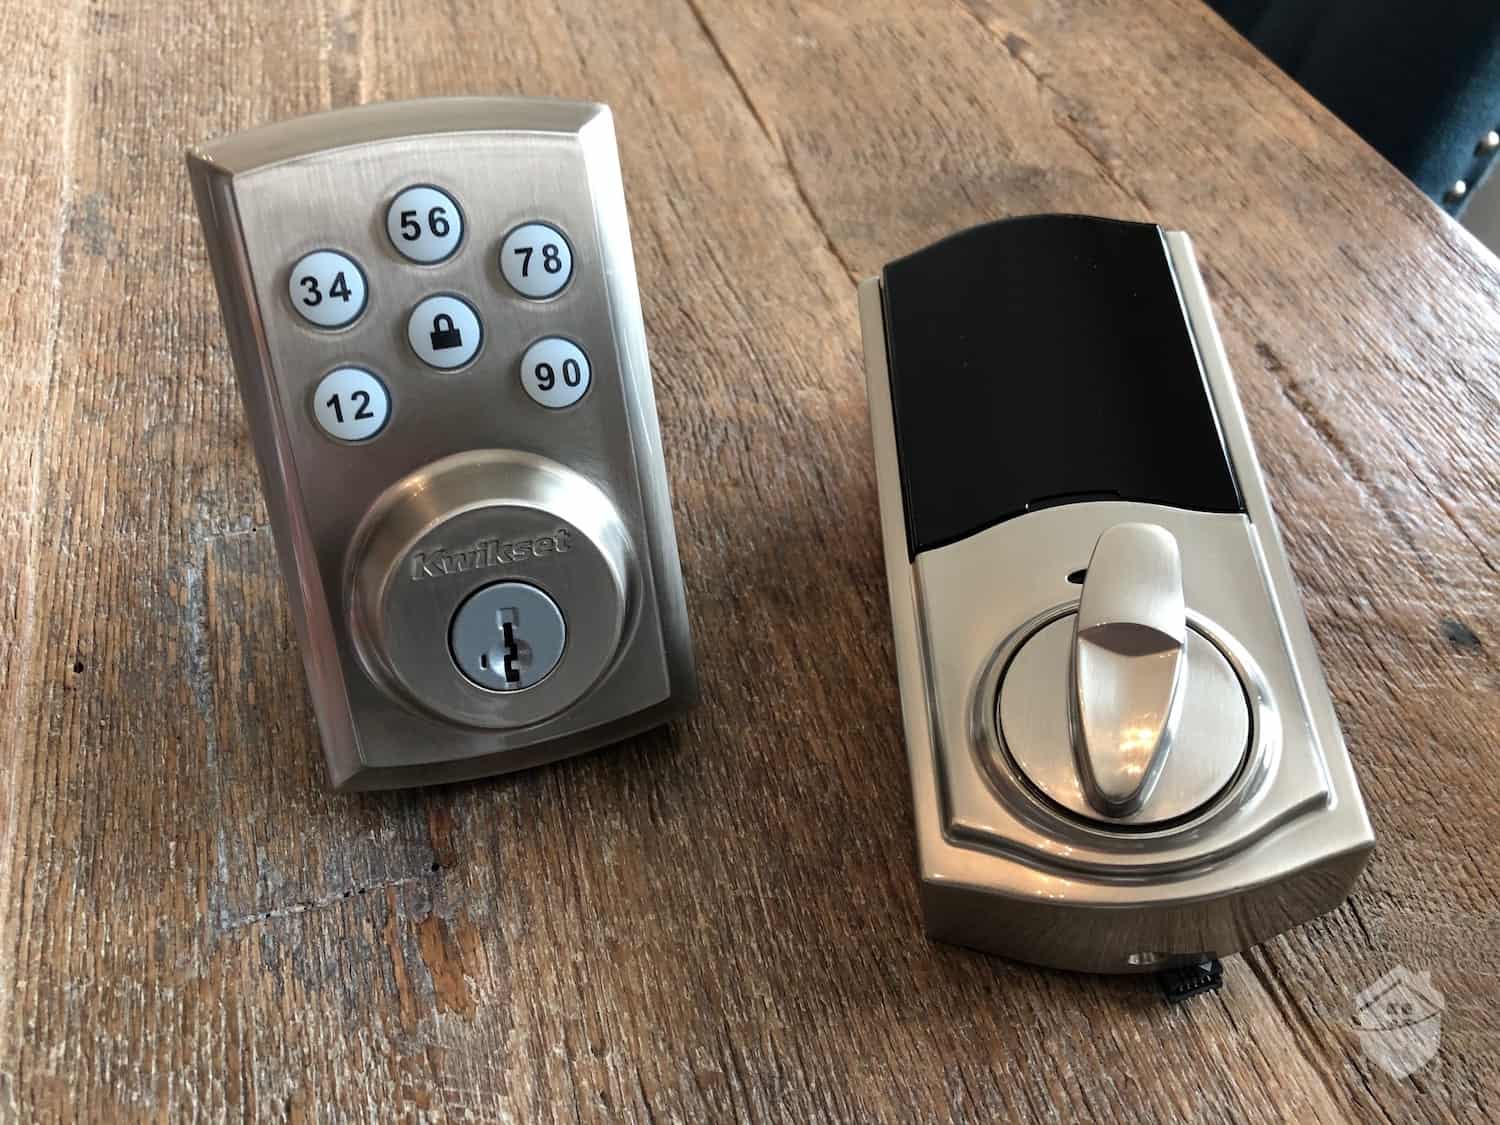 Coolest Tech » Create a Bump Key to Open Any Door